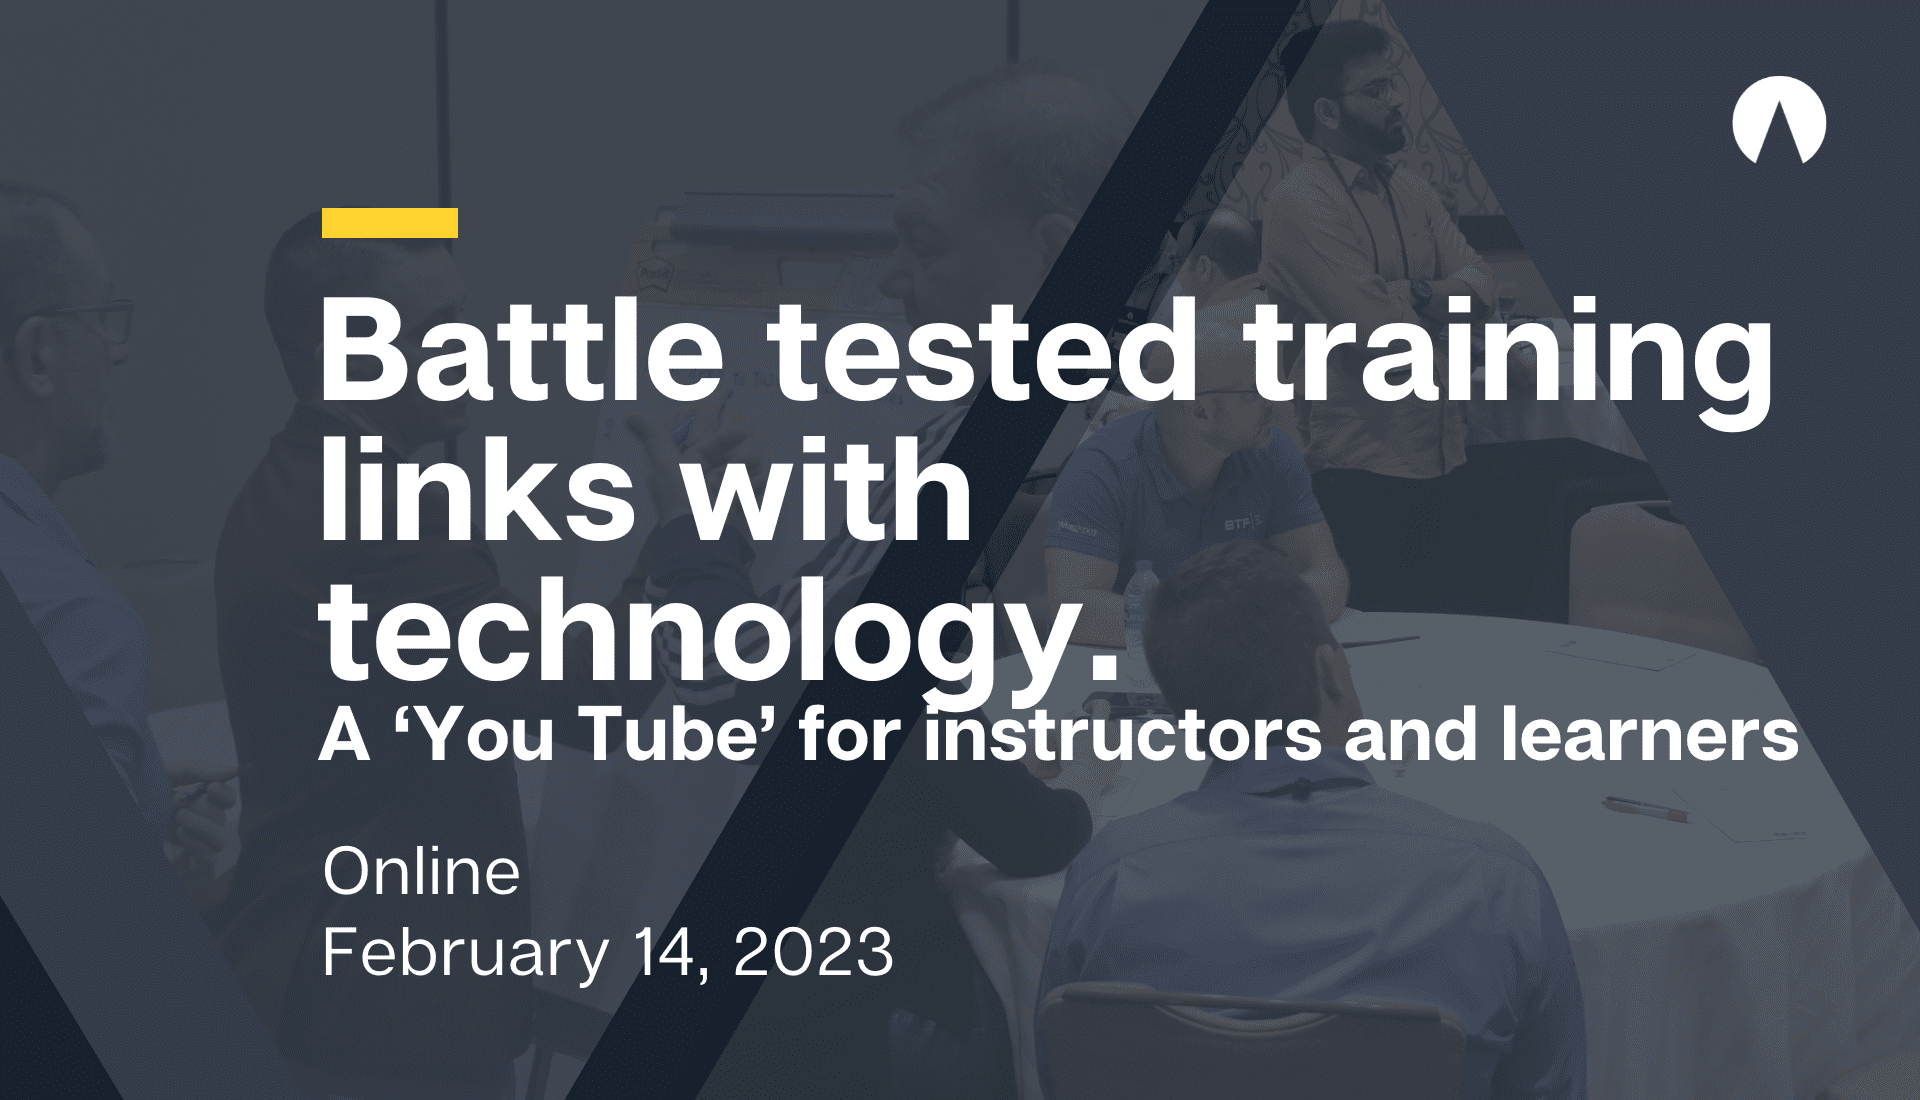 Battle tested training links with technology.